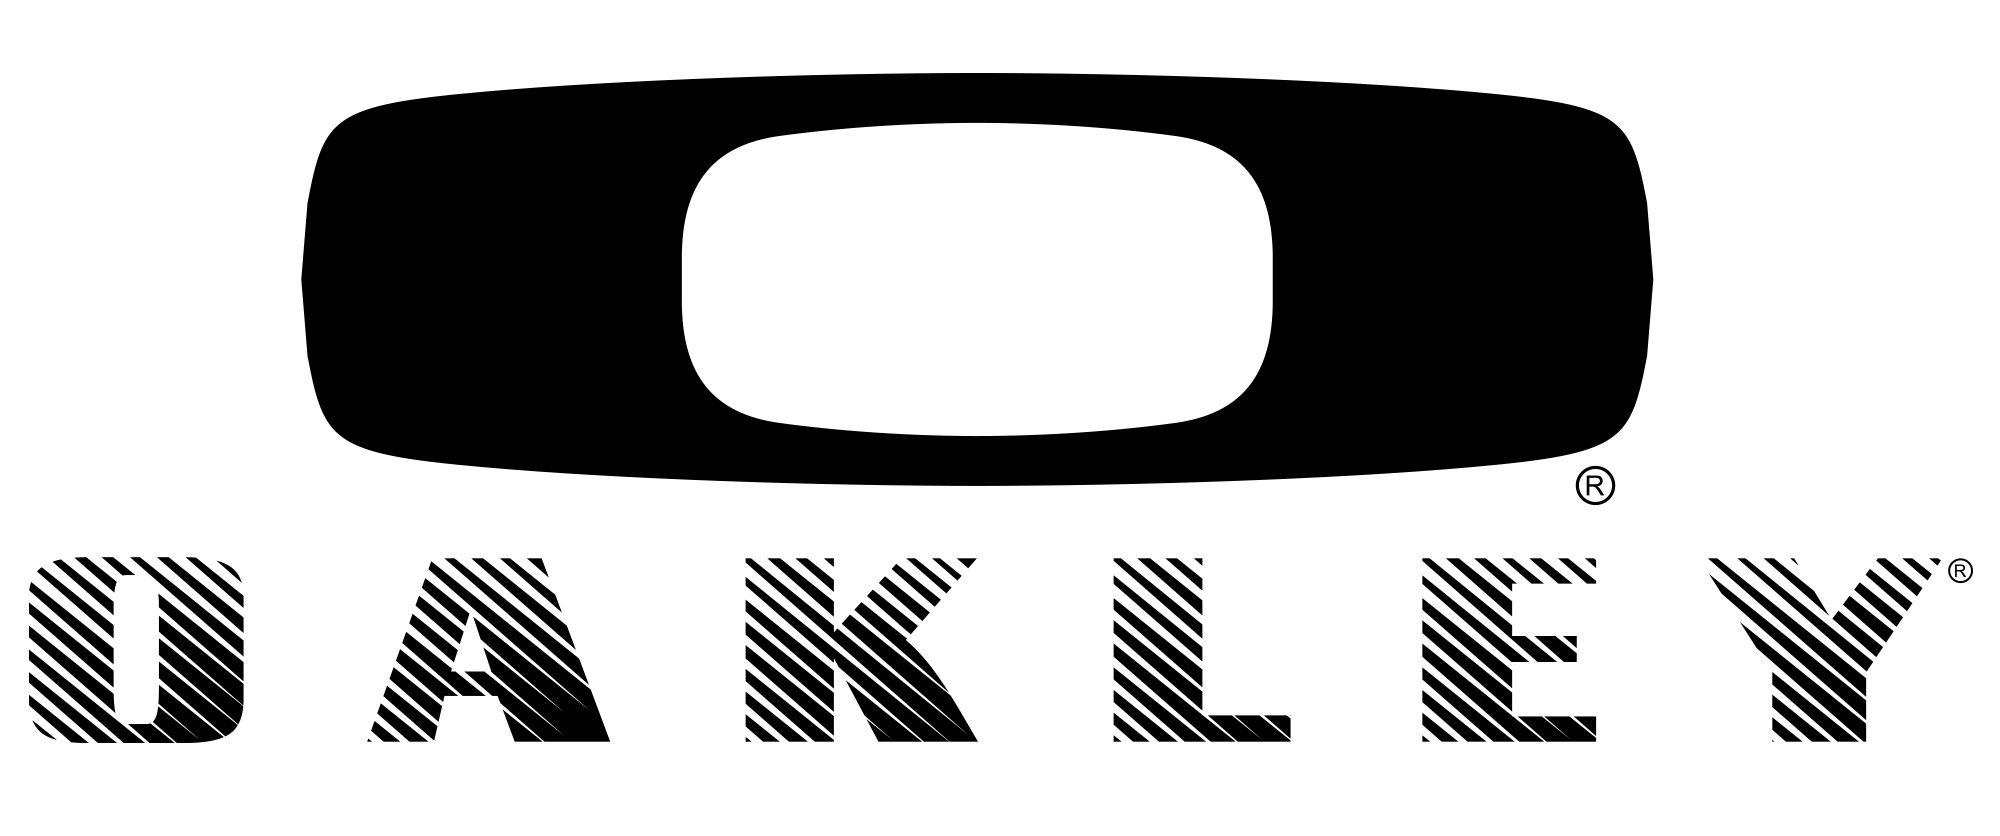 Oakly Logo - Meaning Oakley logo and symbol. history and evolution